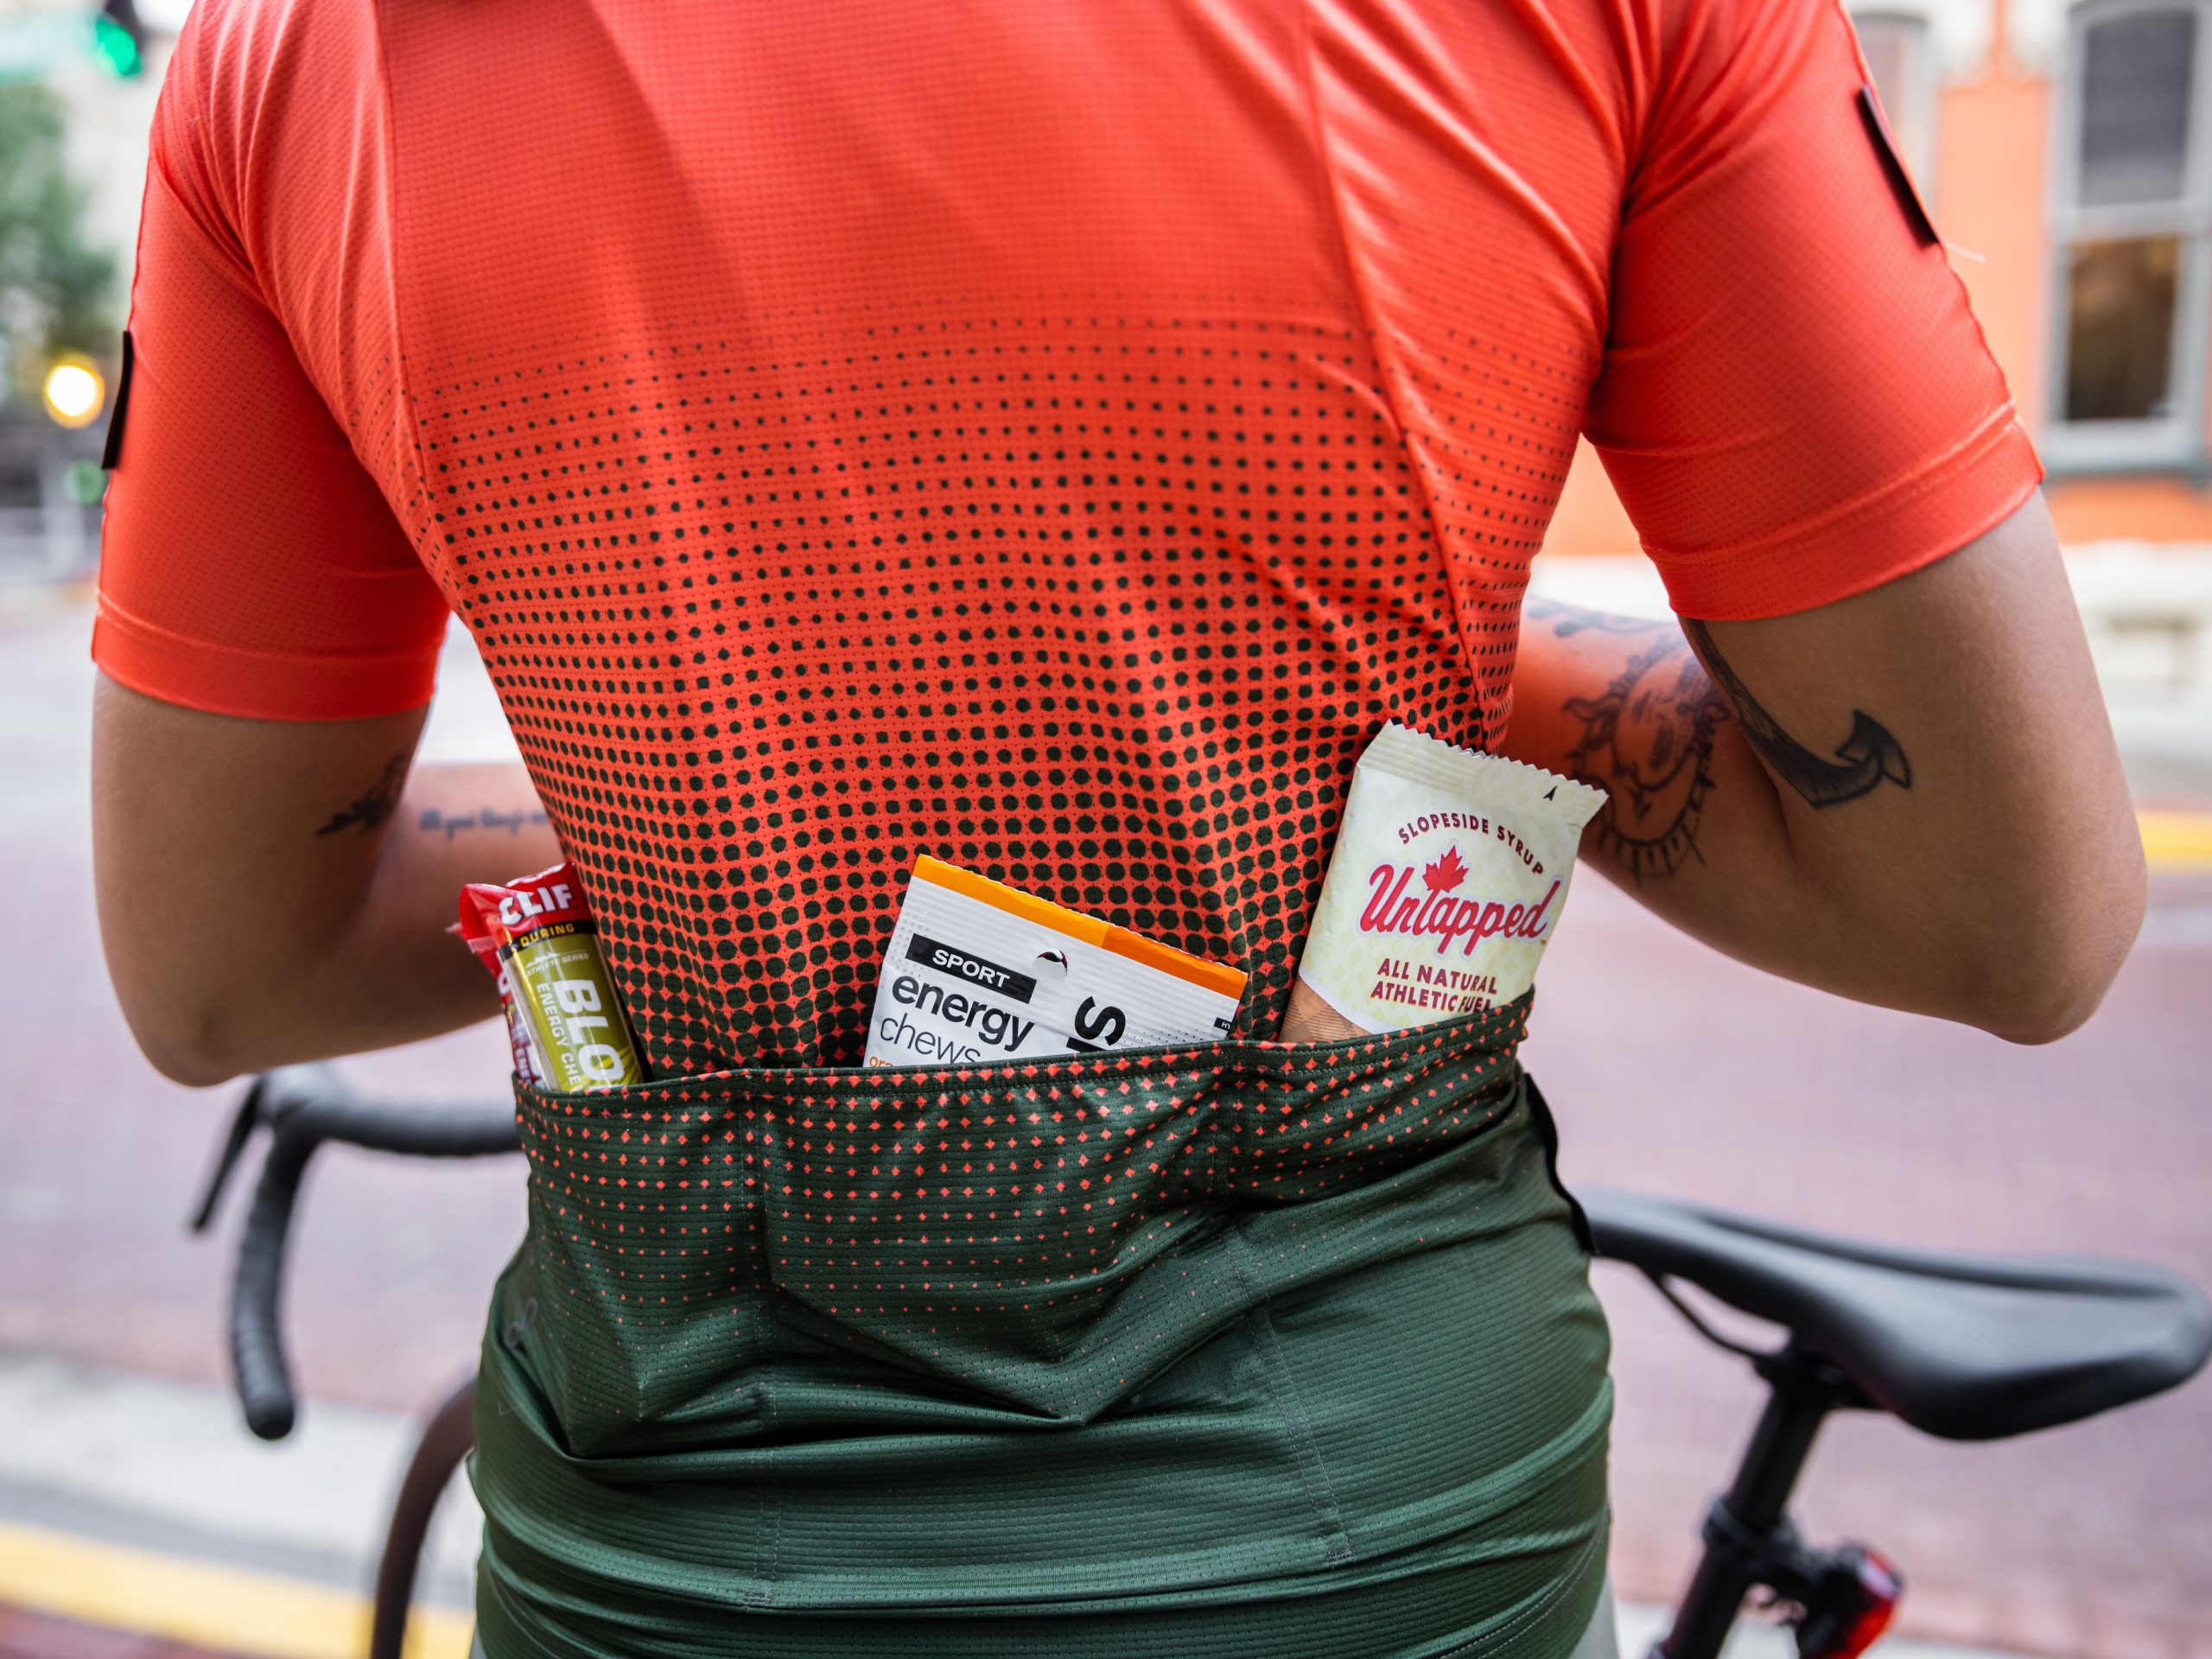 Rider's back pockets stuffed with gels, chews, and granola bars